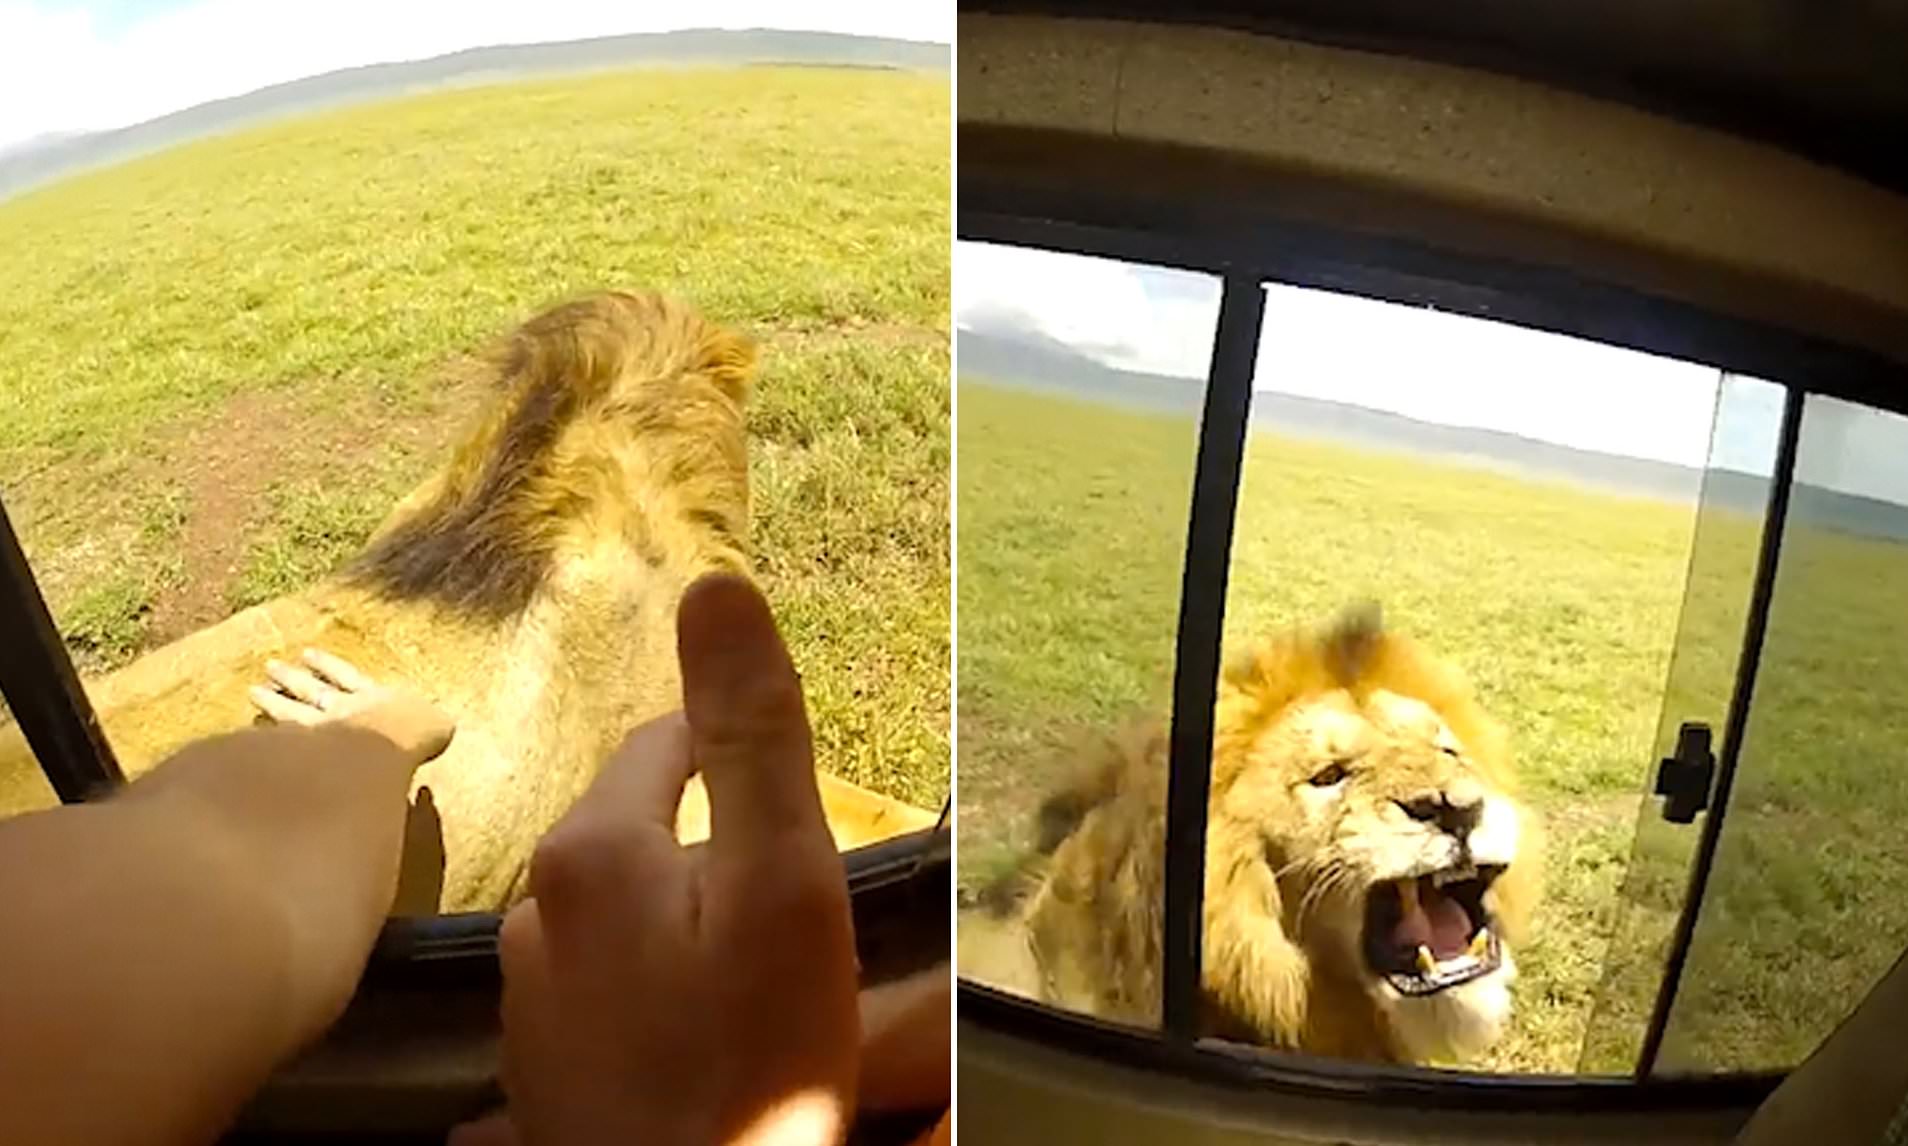 What if a lion jumps on our car?